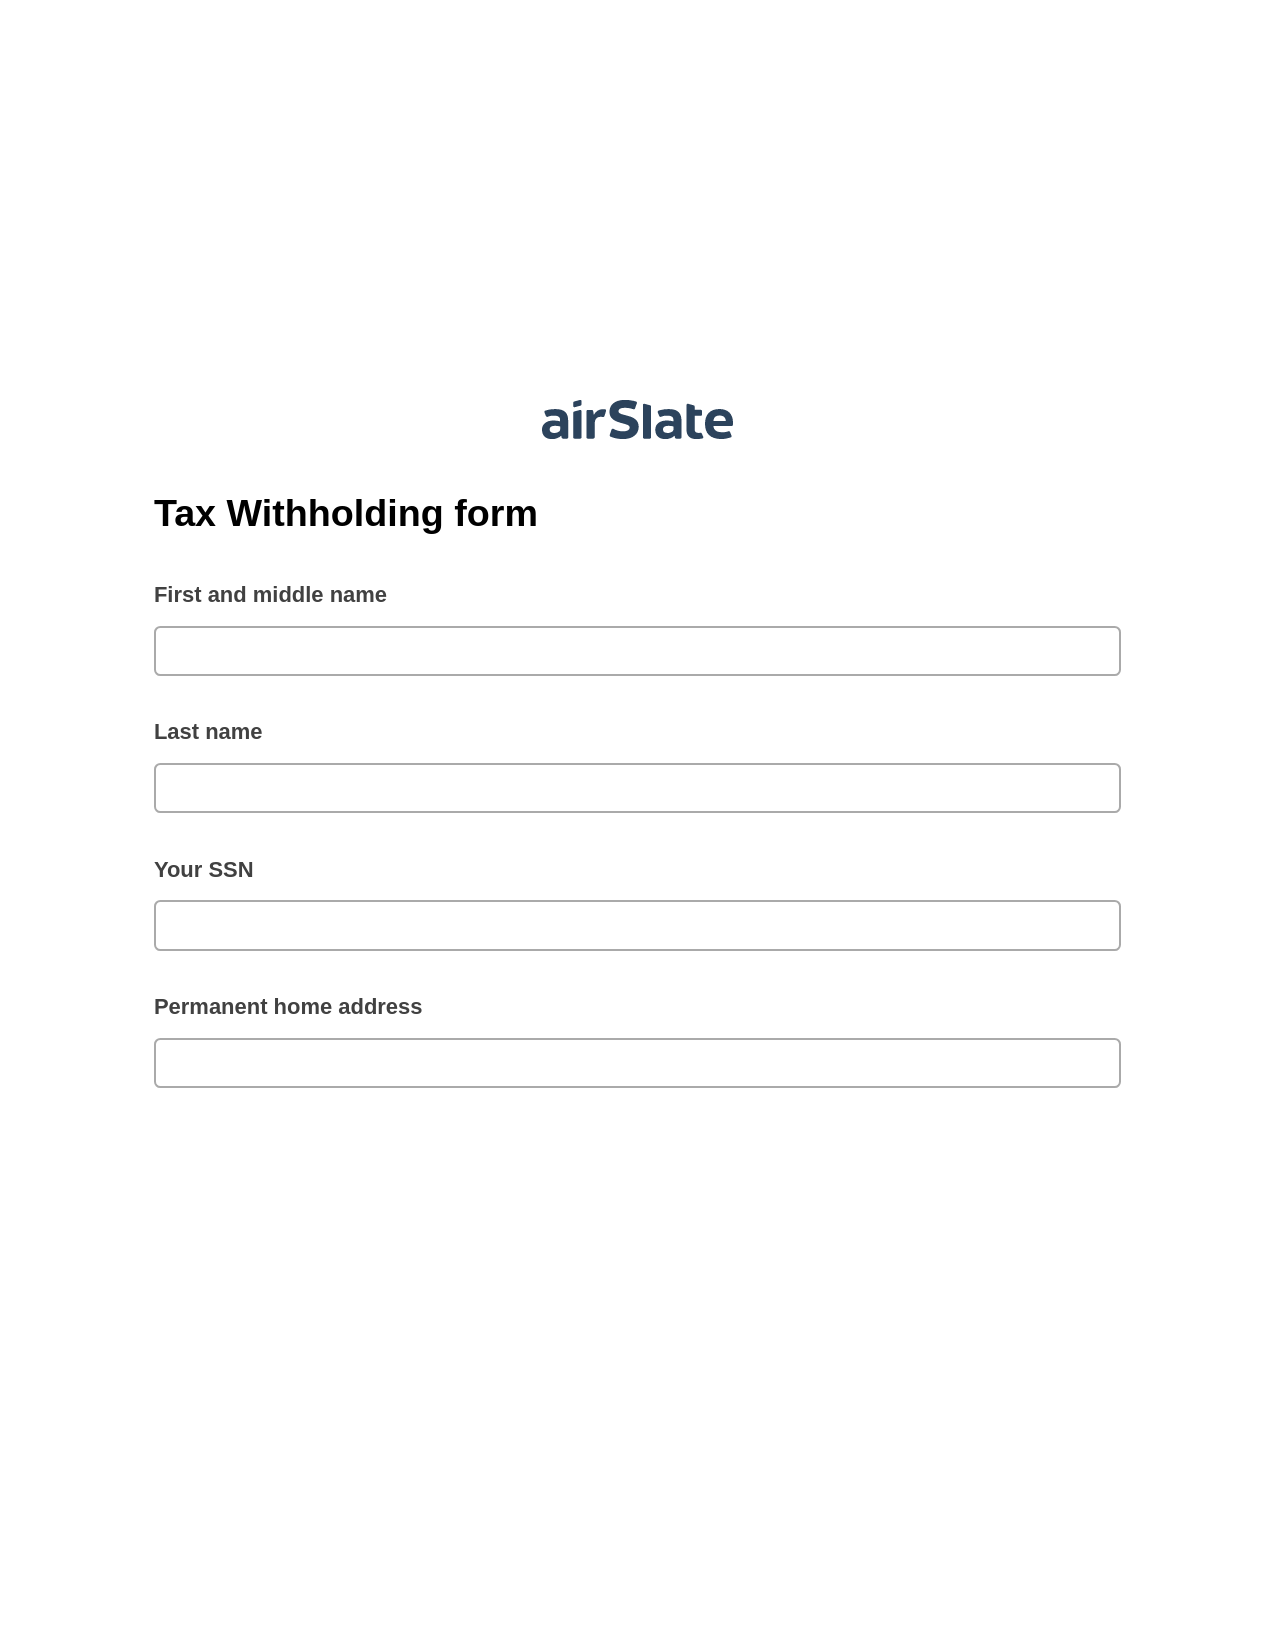 Tax Withholding form Pre-fill from CSV File Bot, Lock the Slate Bot, Export to Excel 365 Bot